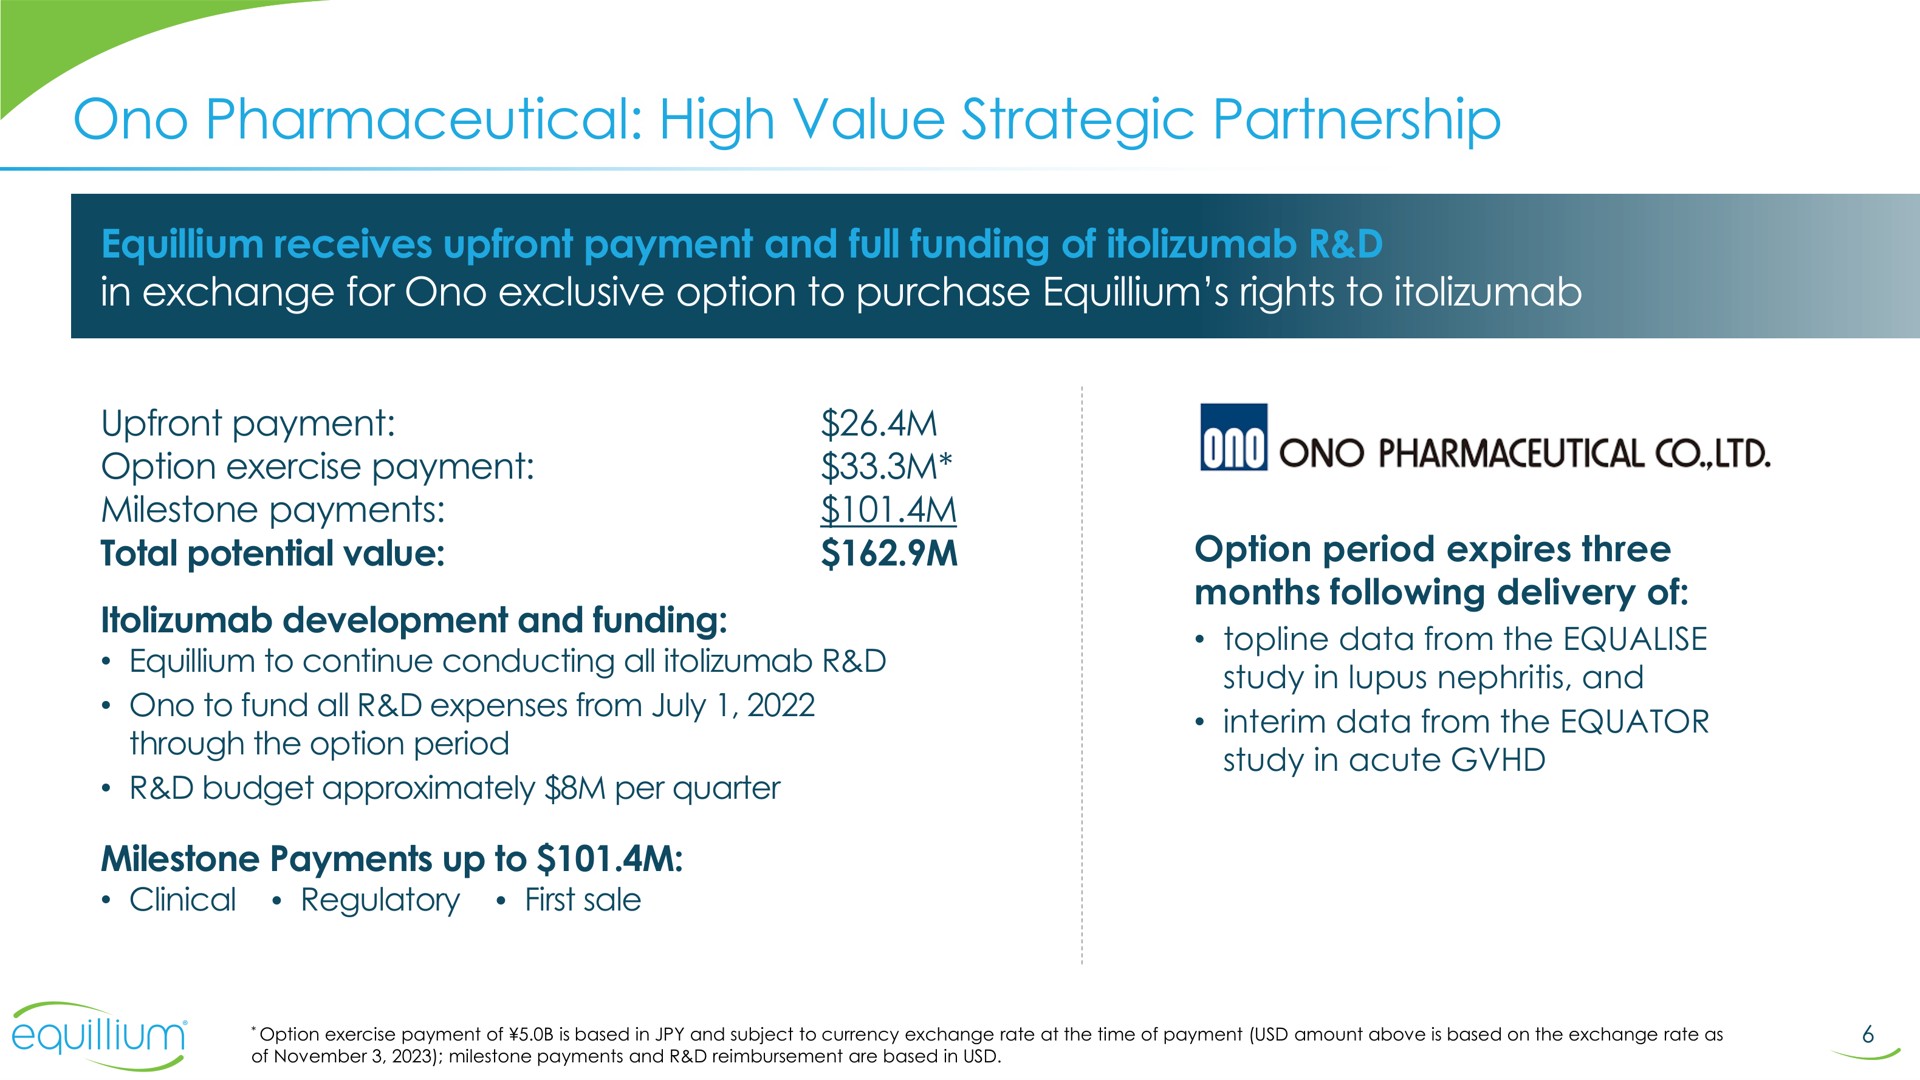 pharmaceutical high value strategic partnership prone tie development and funding as topline data from the interim data from the equator | Equillium